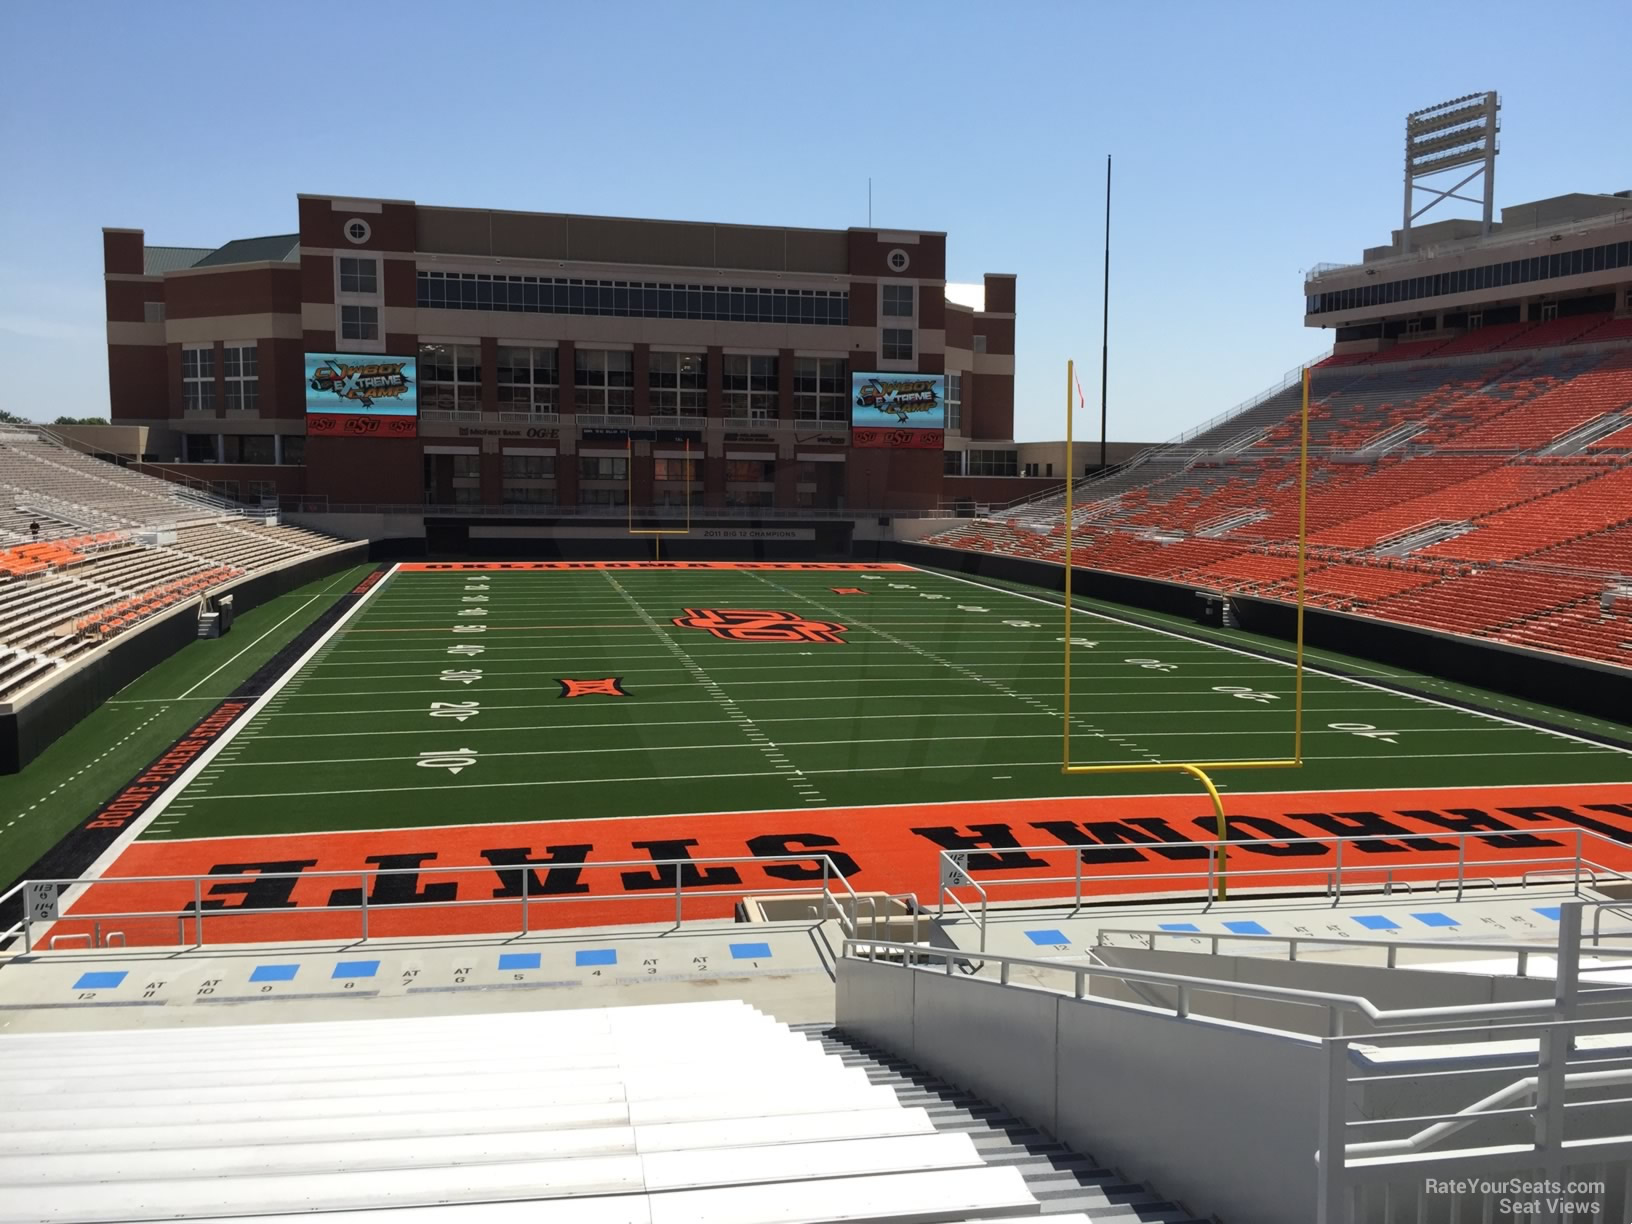 section 218, row 20 seat view  - boone pickens stadium